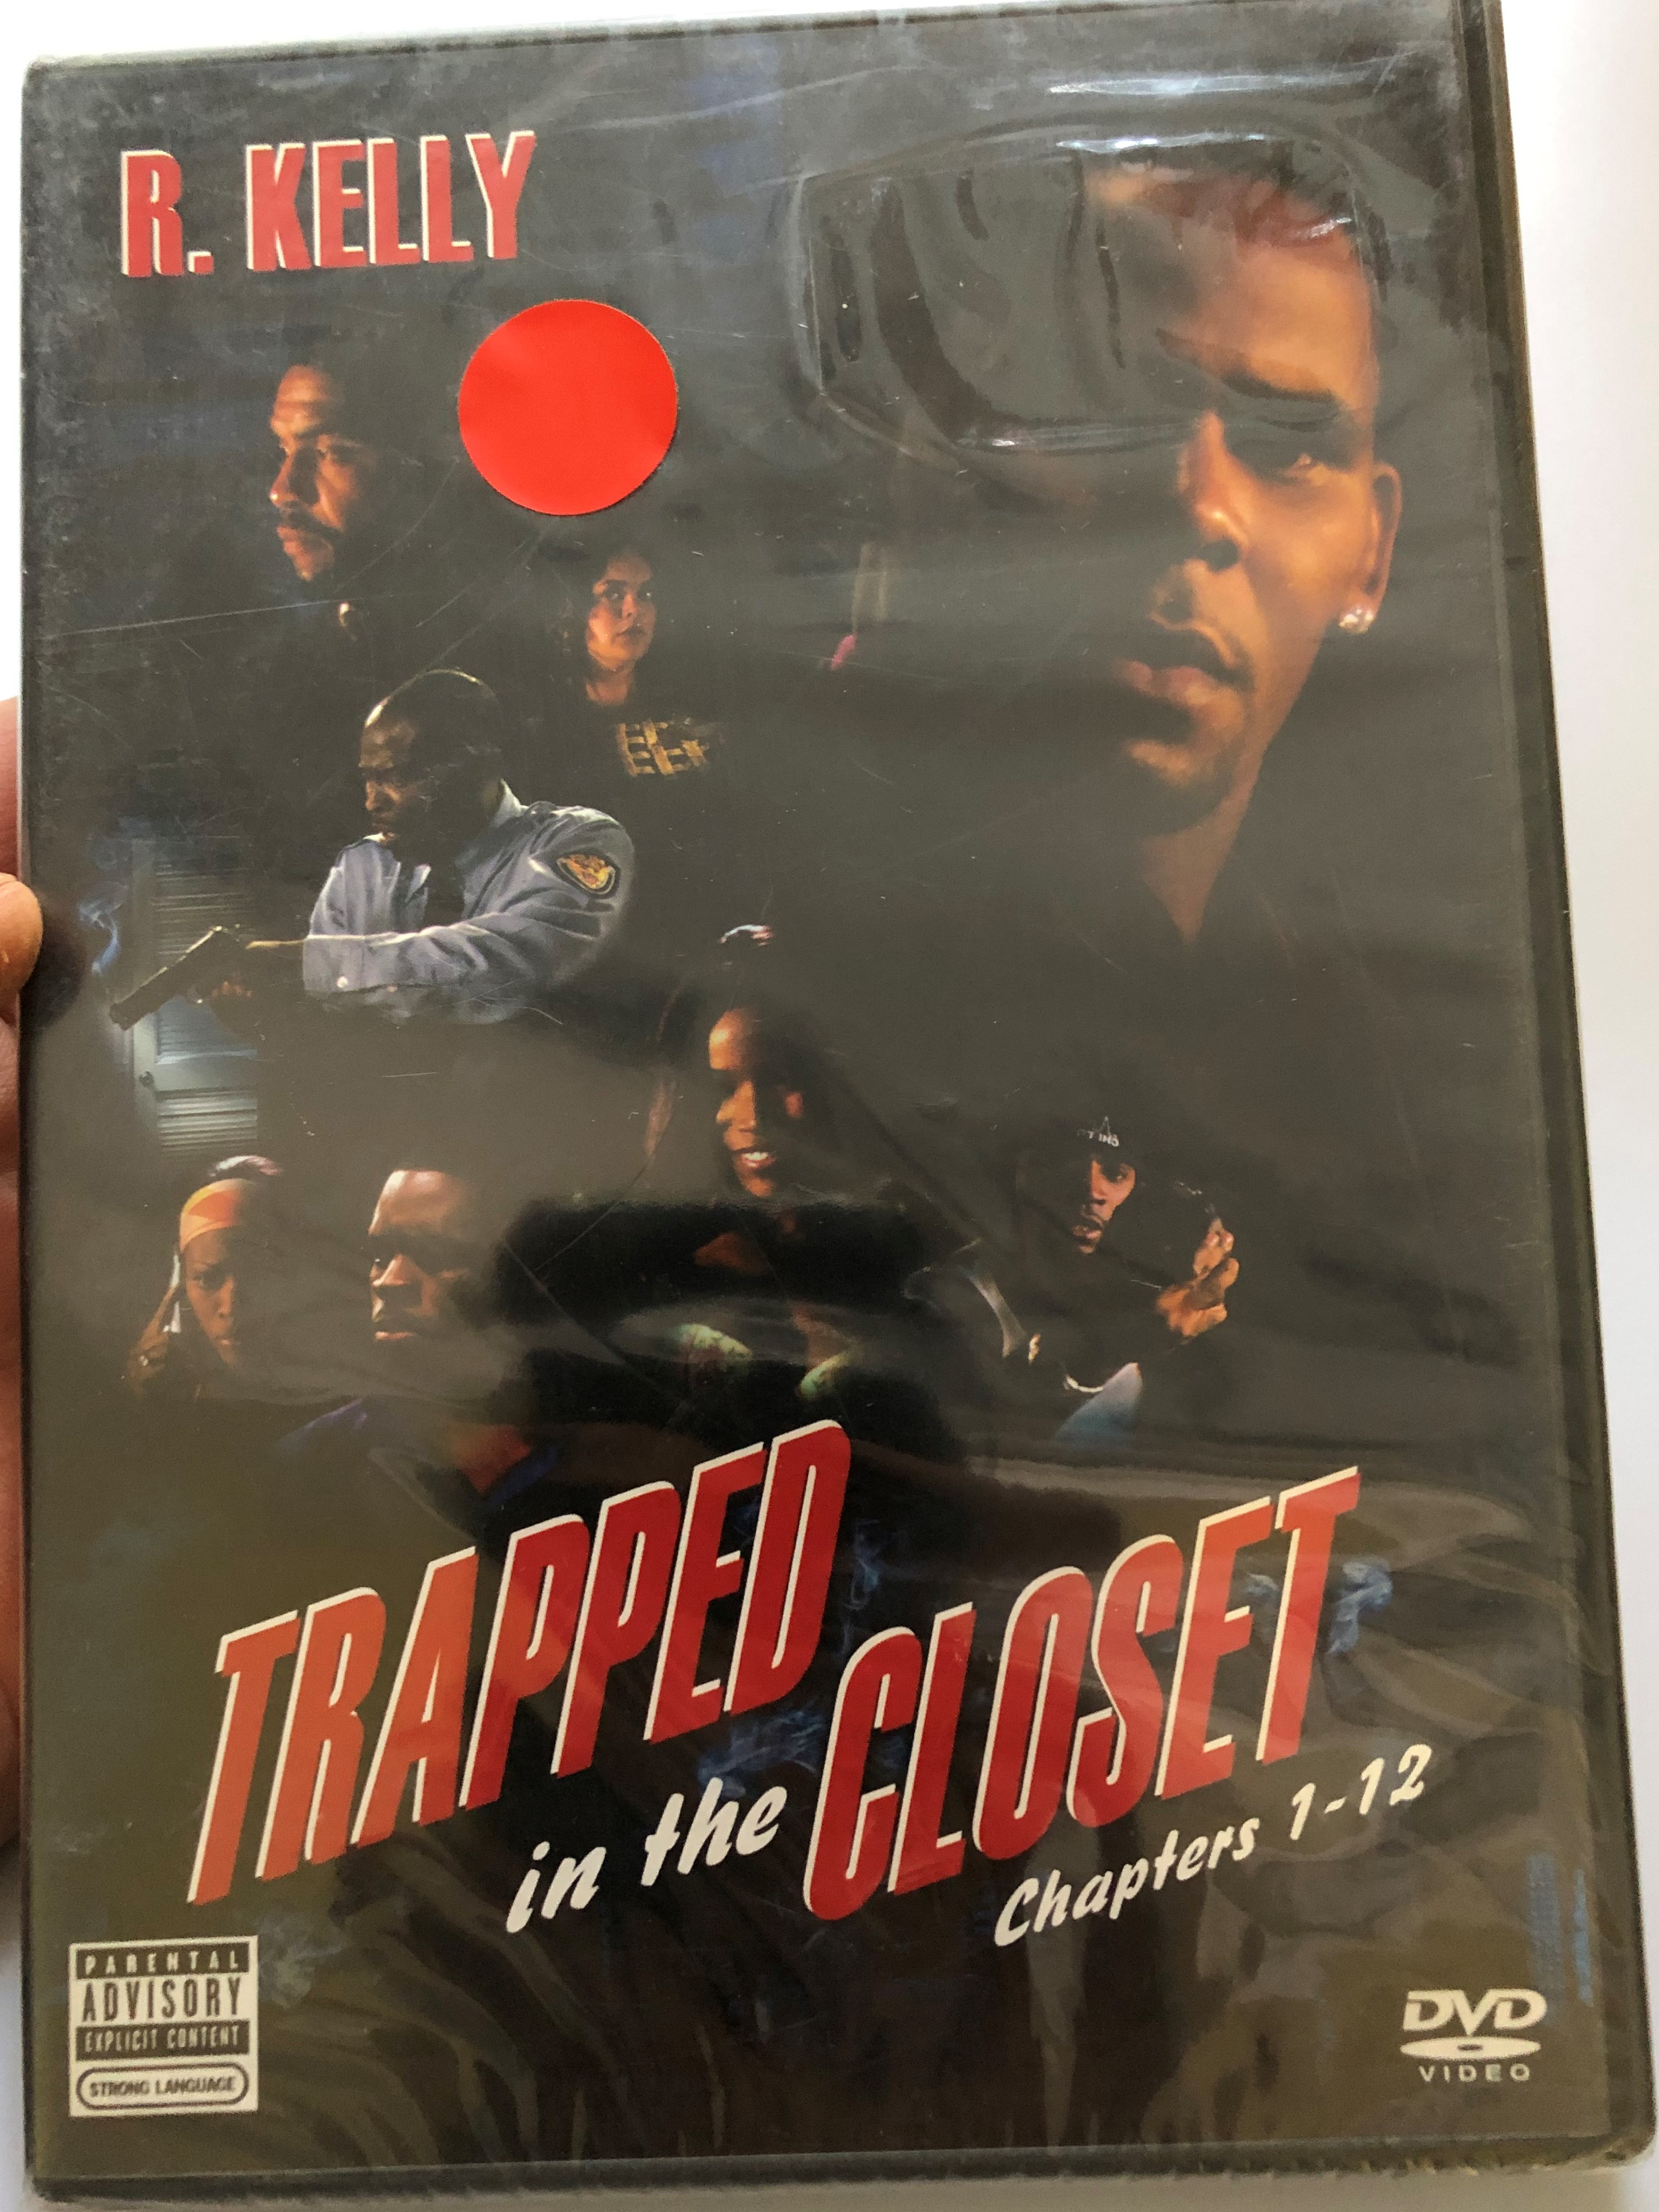 R. Kelly - Trapped in the Closet DVD 2005 Chapters 1-12 / Directed by R.  Kelly, Jim Swaffield / Starring: R. Kelly, Cat Wilson, Rolando A. Boyce,  LeShay Tomlinson / An opera by American R&B singer - Bible in My Language